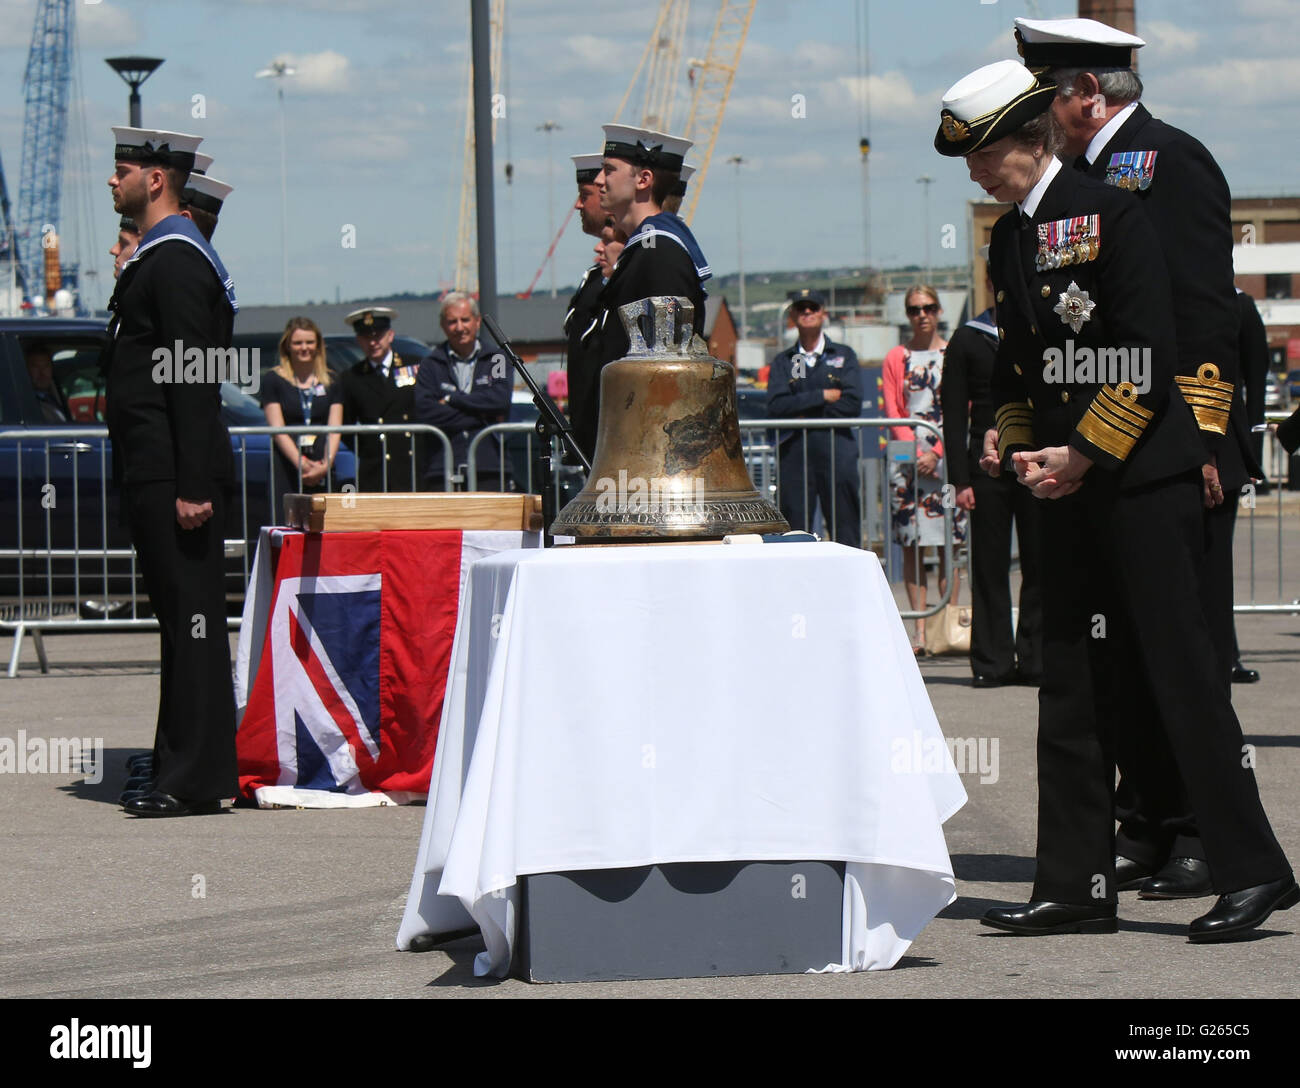 Portsmouth, Hampshire, UK. 24th May, 2016. A restored bell from a WW2 Battlecruiser has been unveiled by Princess Anne today. The bell from HMS Hood is now on display at the National Museum of the Royal Navy (NMRN) at Portsmouth Historic Dockyard after being recovered from the seabed last year. HMS Hood was hit by a shell by German battleship, Bismarck, in 1941 and today marks the 75th anniversary of that day. Princess Anne then went on to officially open the NMRN's new exhibition telling the story of the Battle of Jutland Credit:  uknip/Alamy Live News Stock Photo